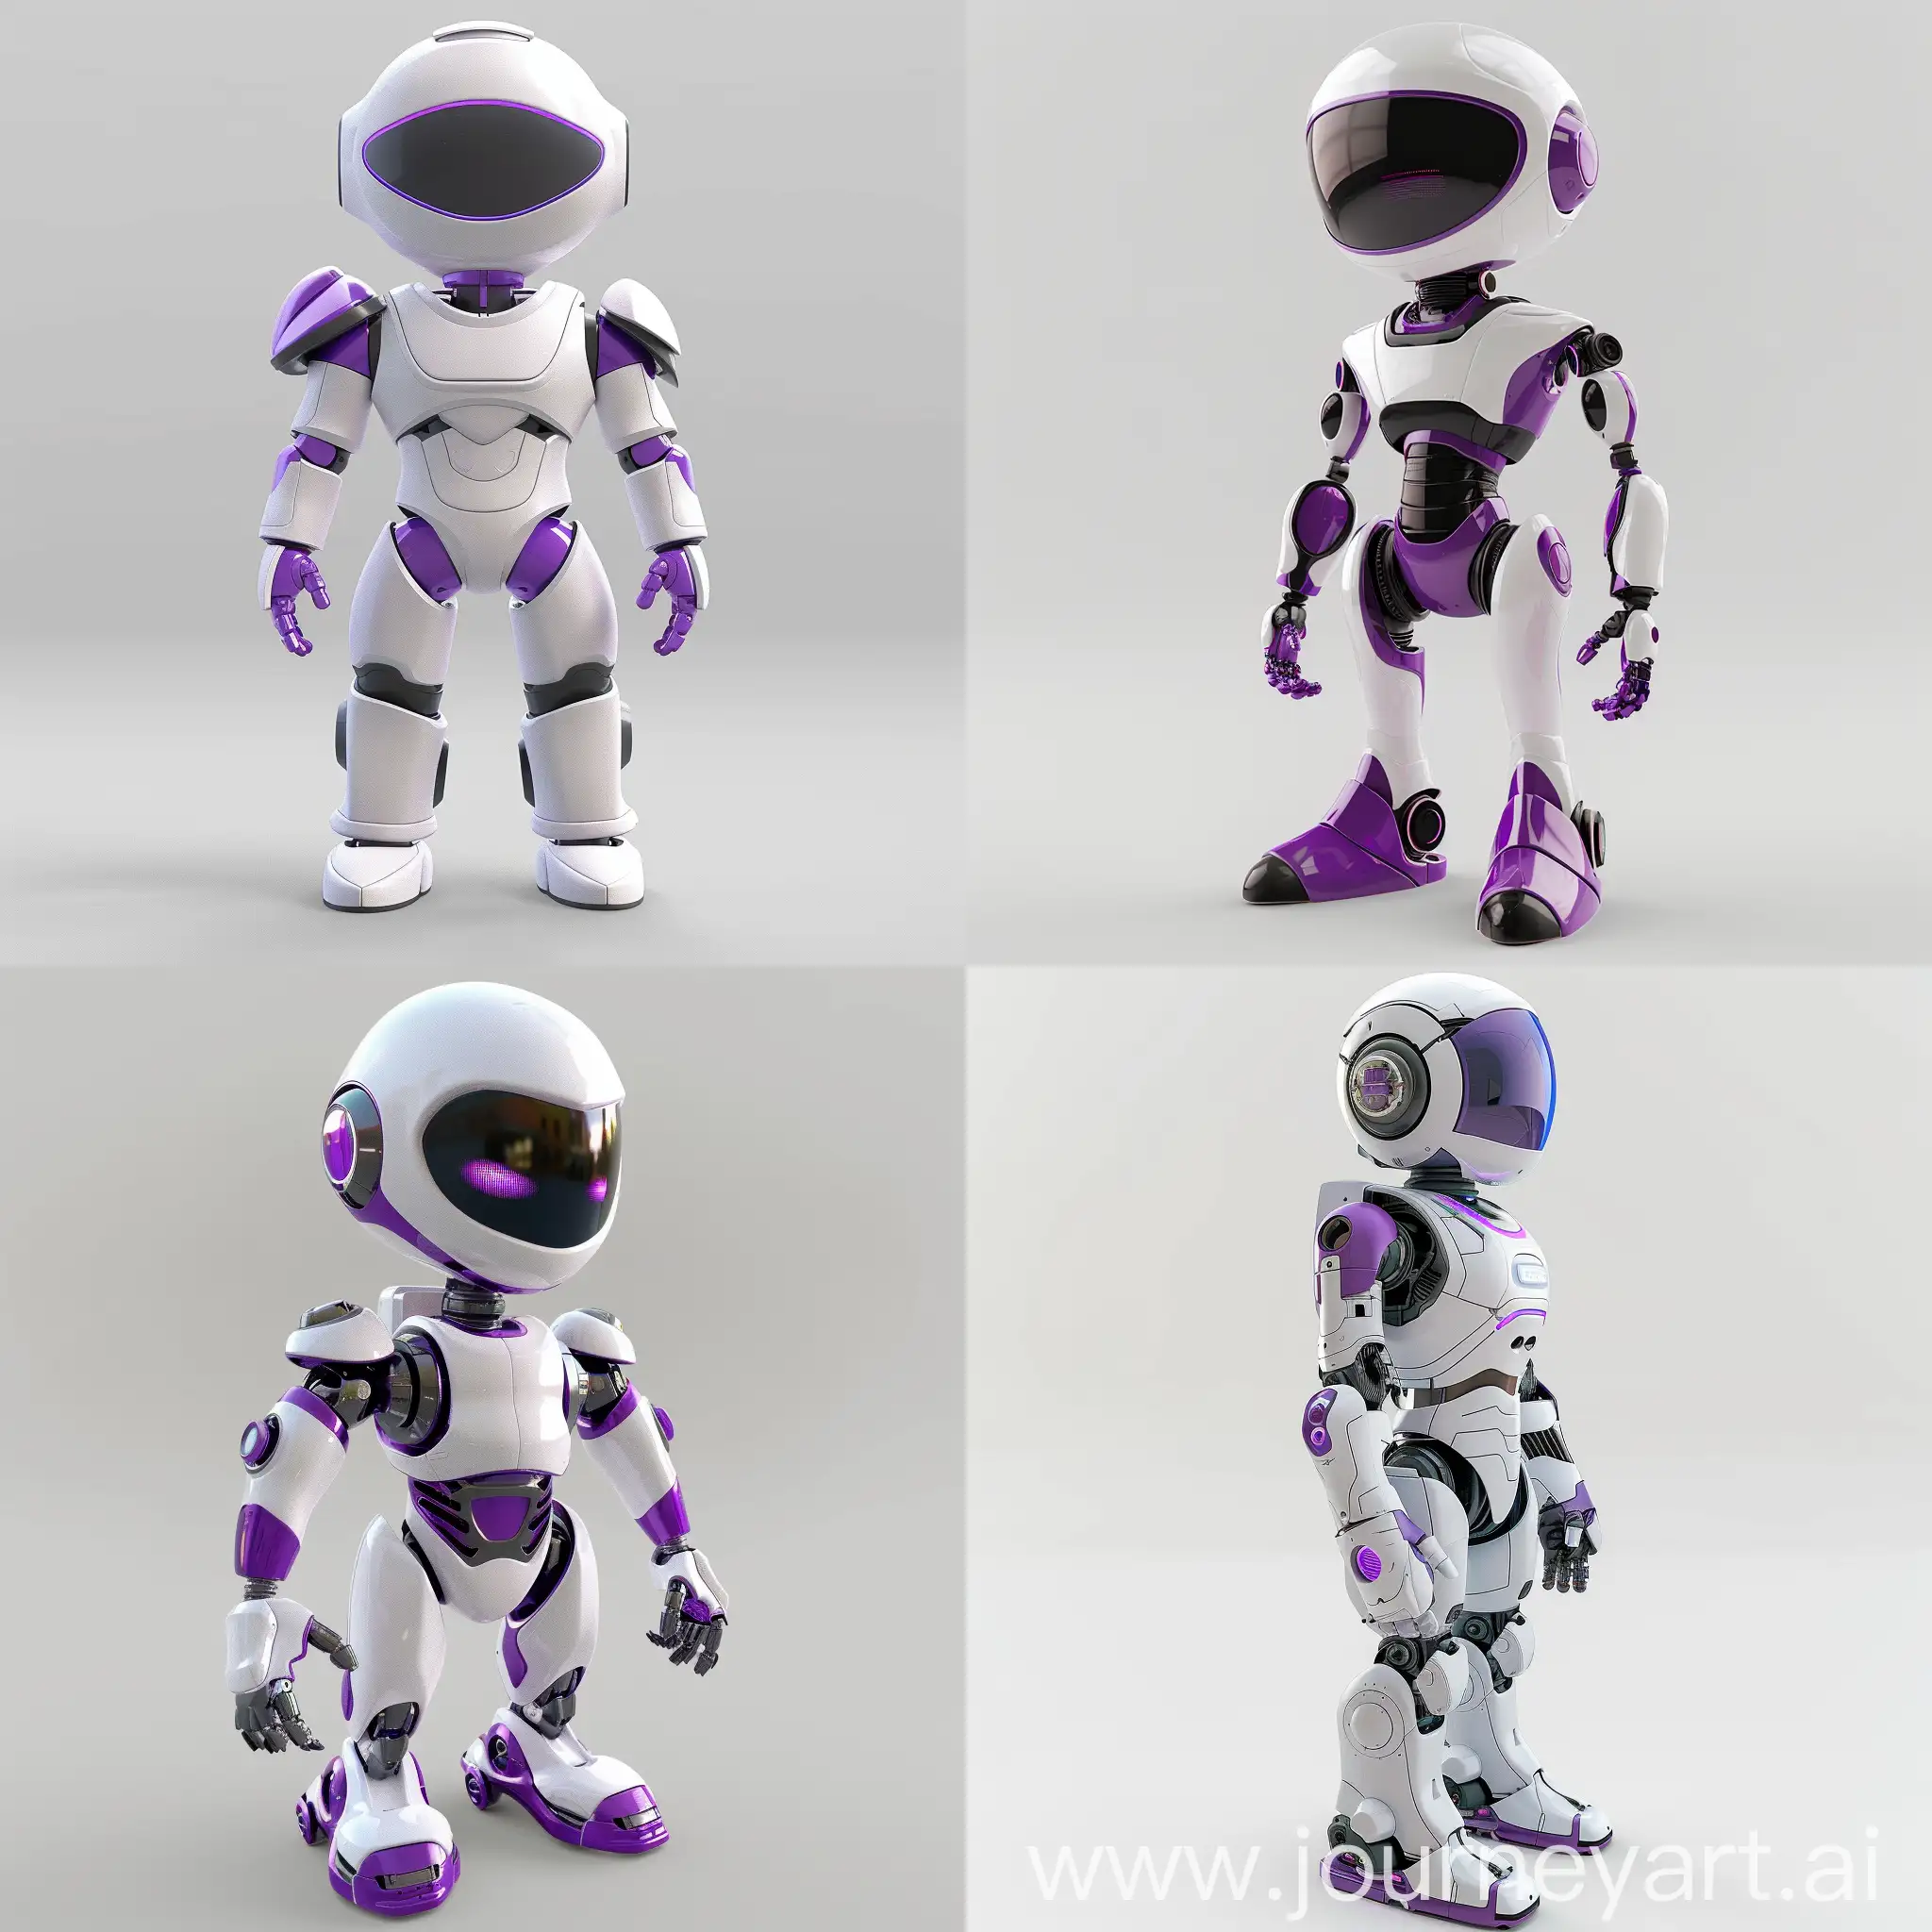 Futuristic-Robot-Child-in-White-and-Purple-HighQuality-3D-Model